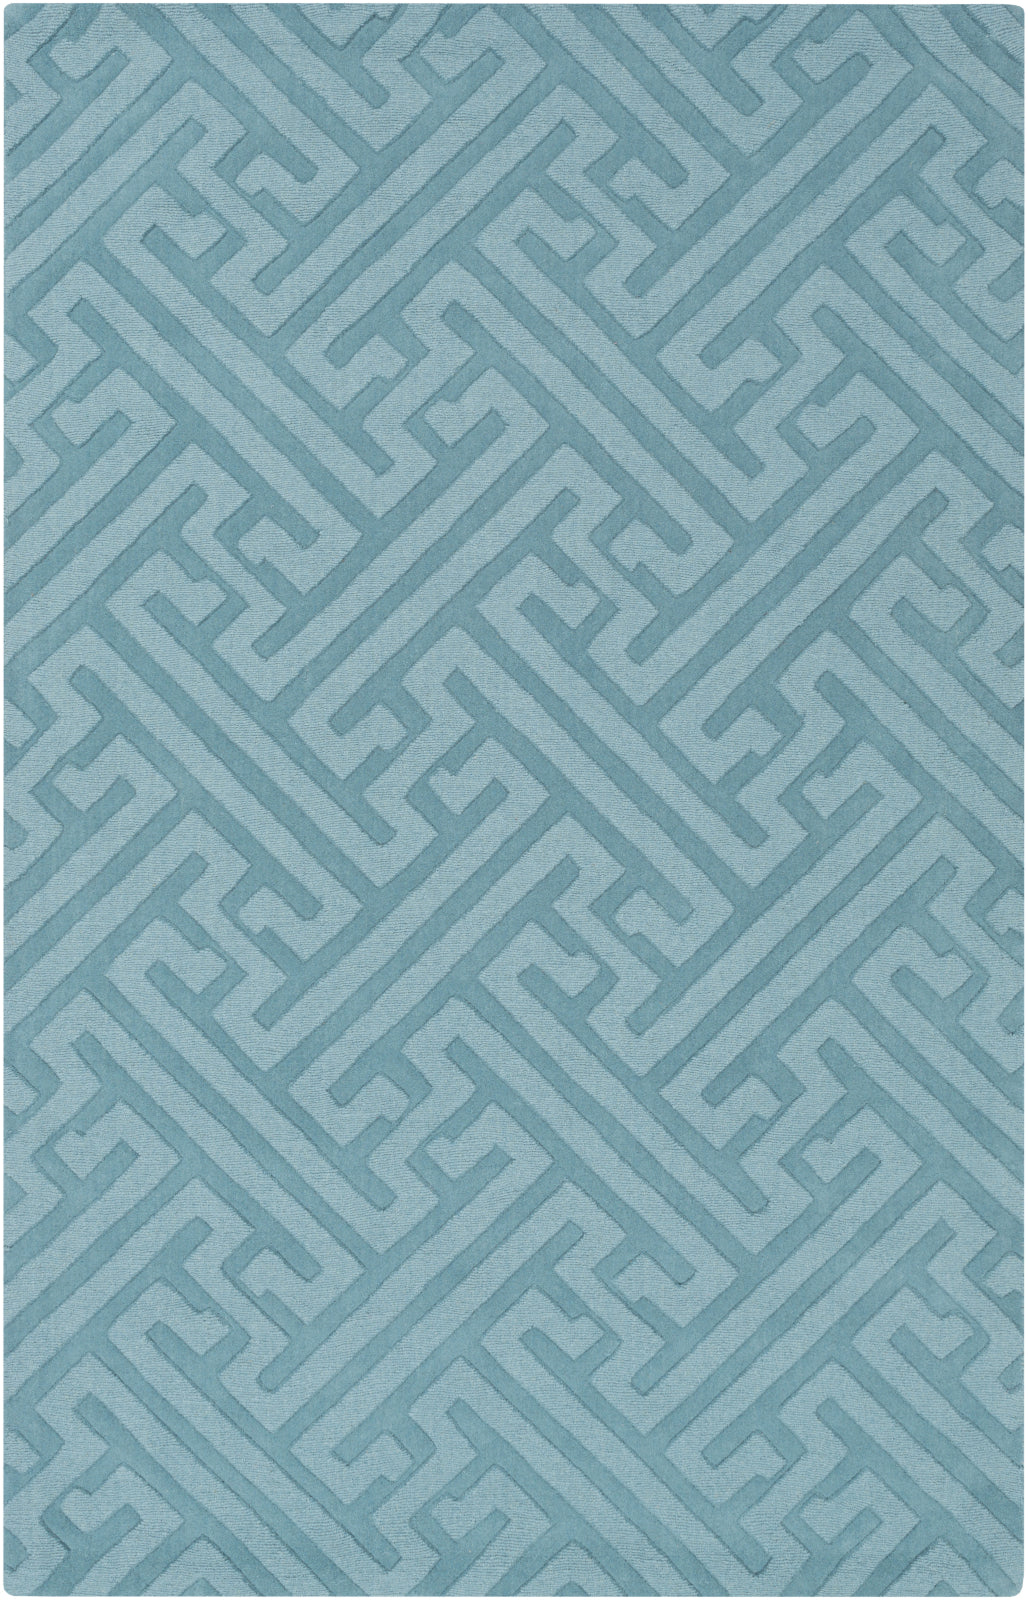 Surya The Oakes OAK-6007 Area Rug by Florence Broadhurst